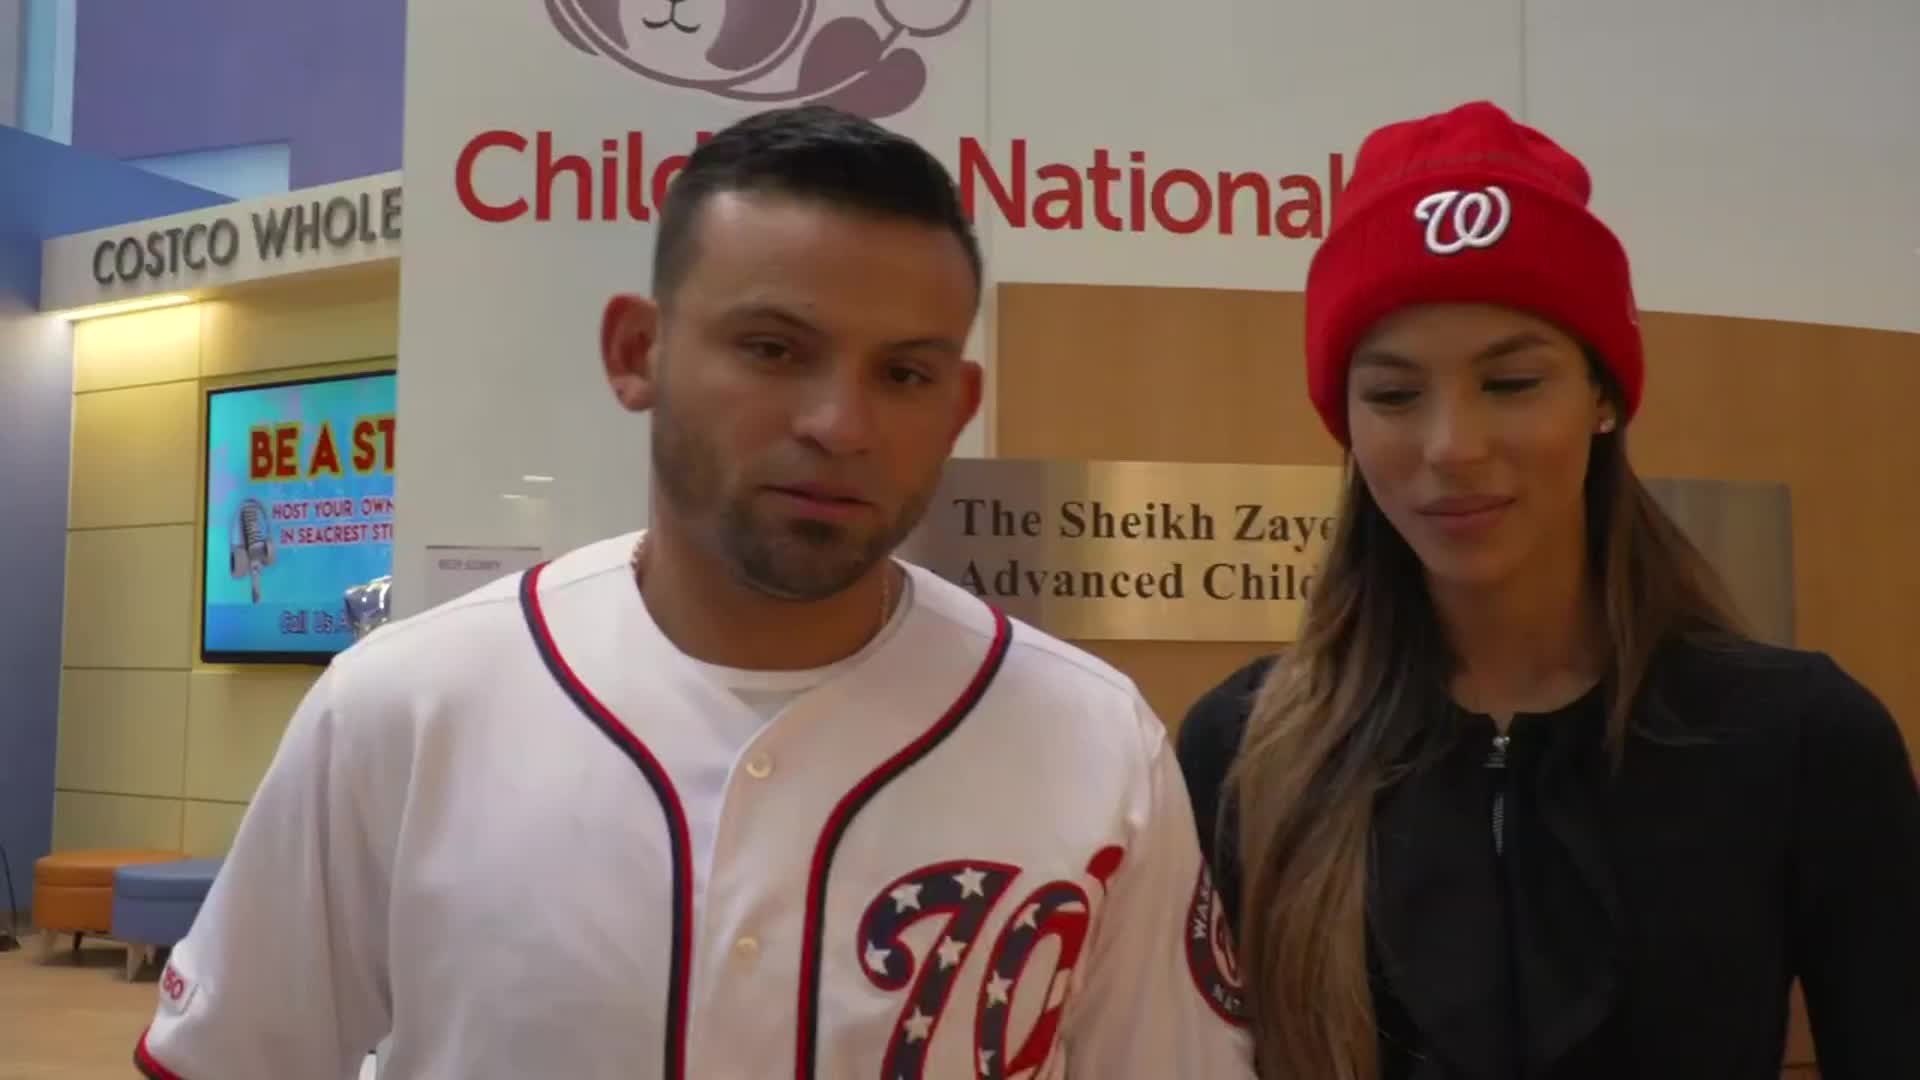 Nationals outfielder visits pediatric cancer before heading to Houston for World Series